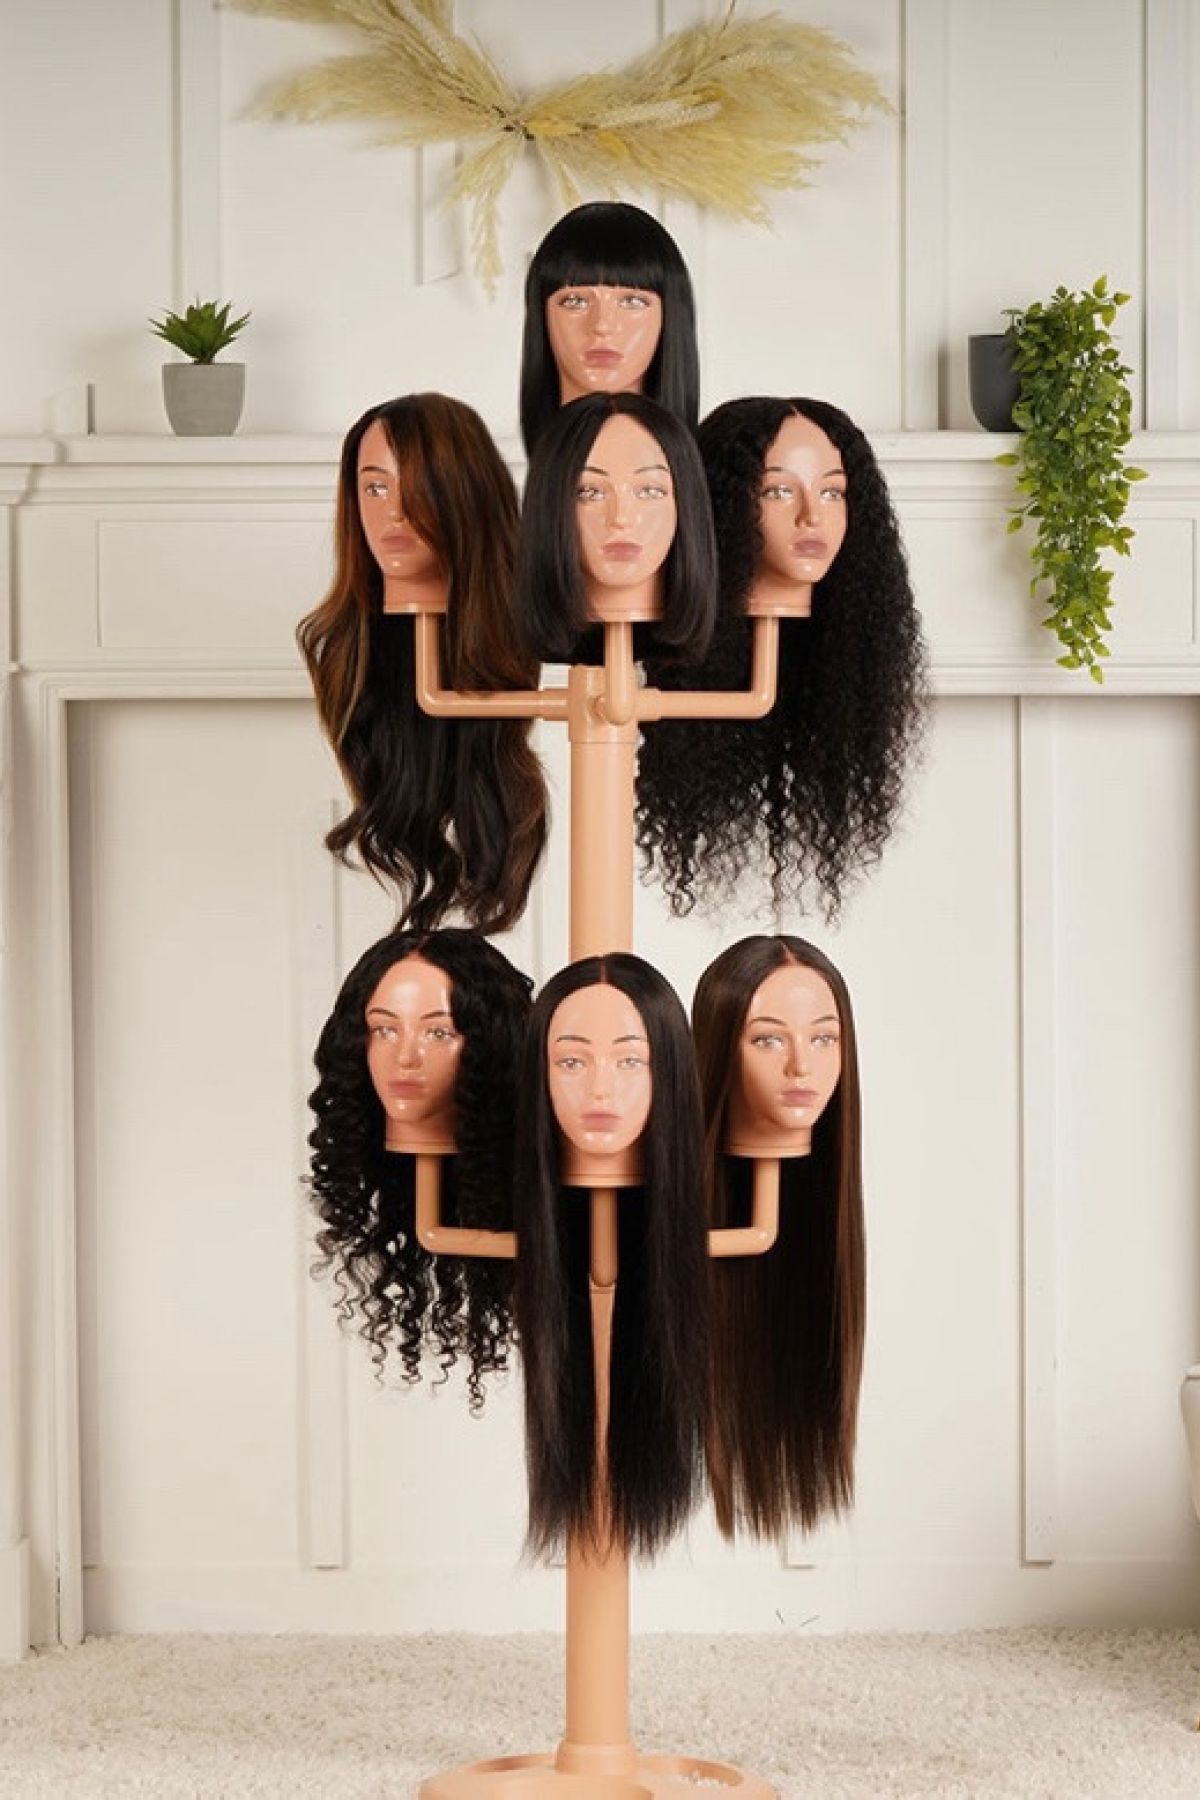 The wig hanger with 7 mannequin head worn with wigs in a living room.